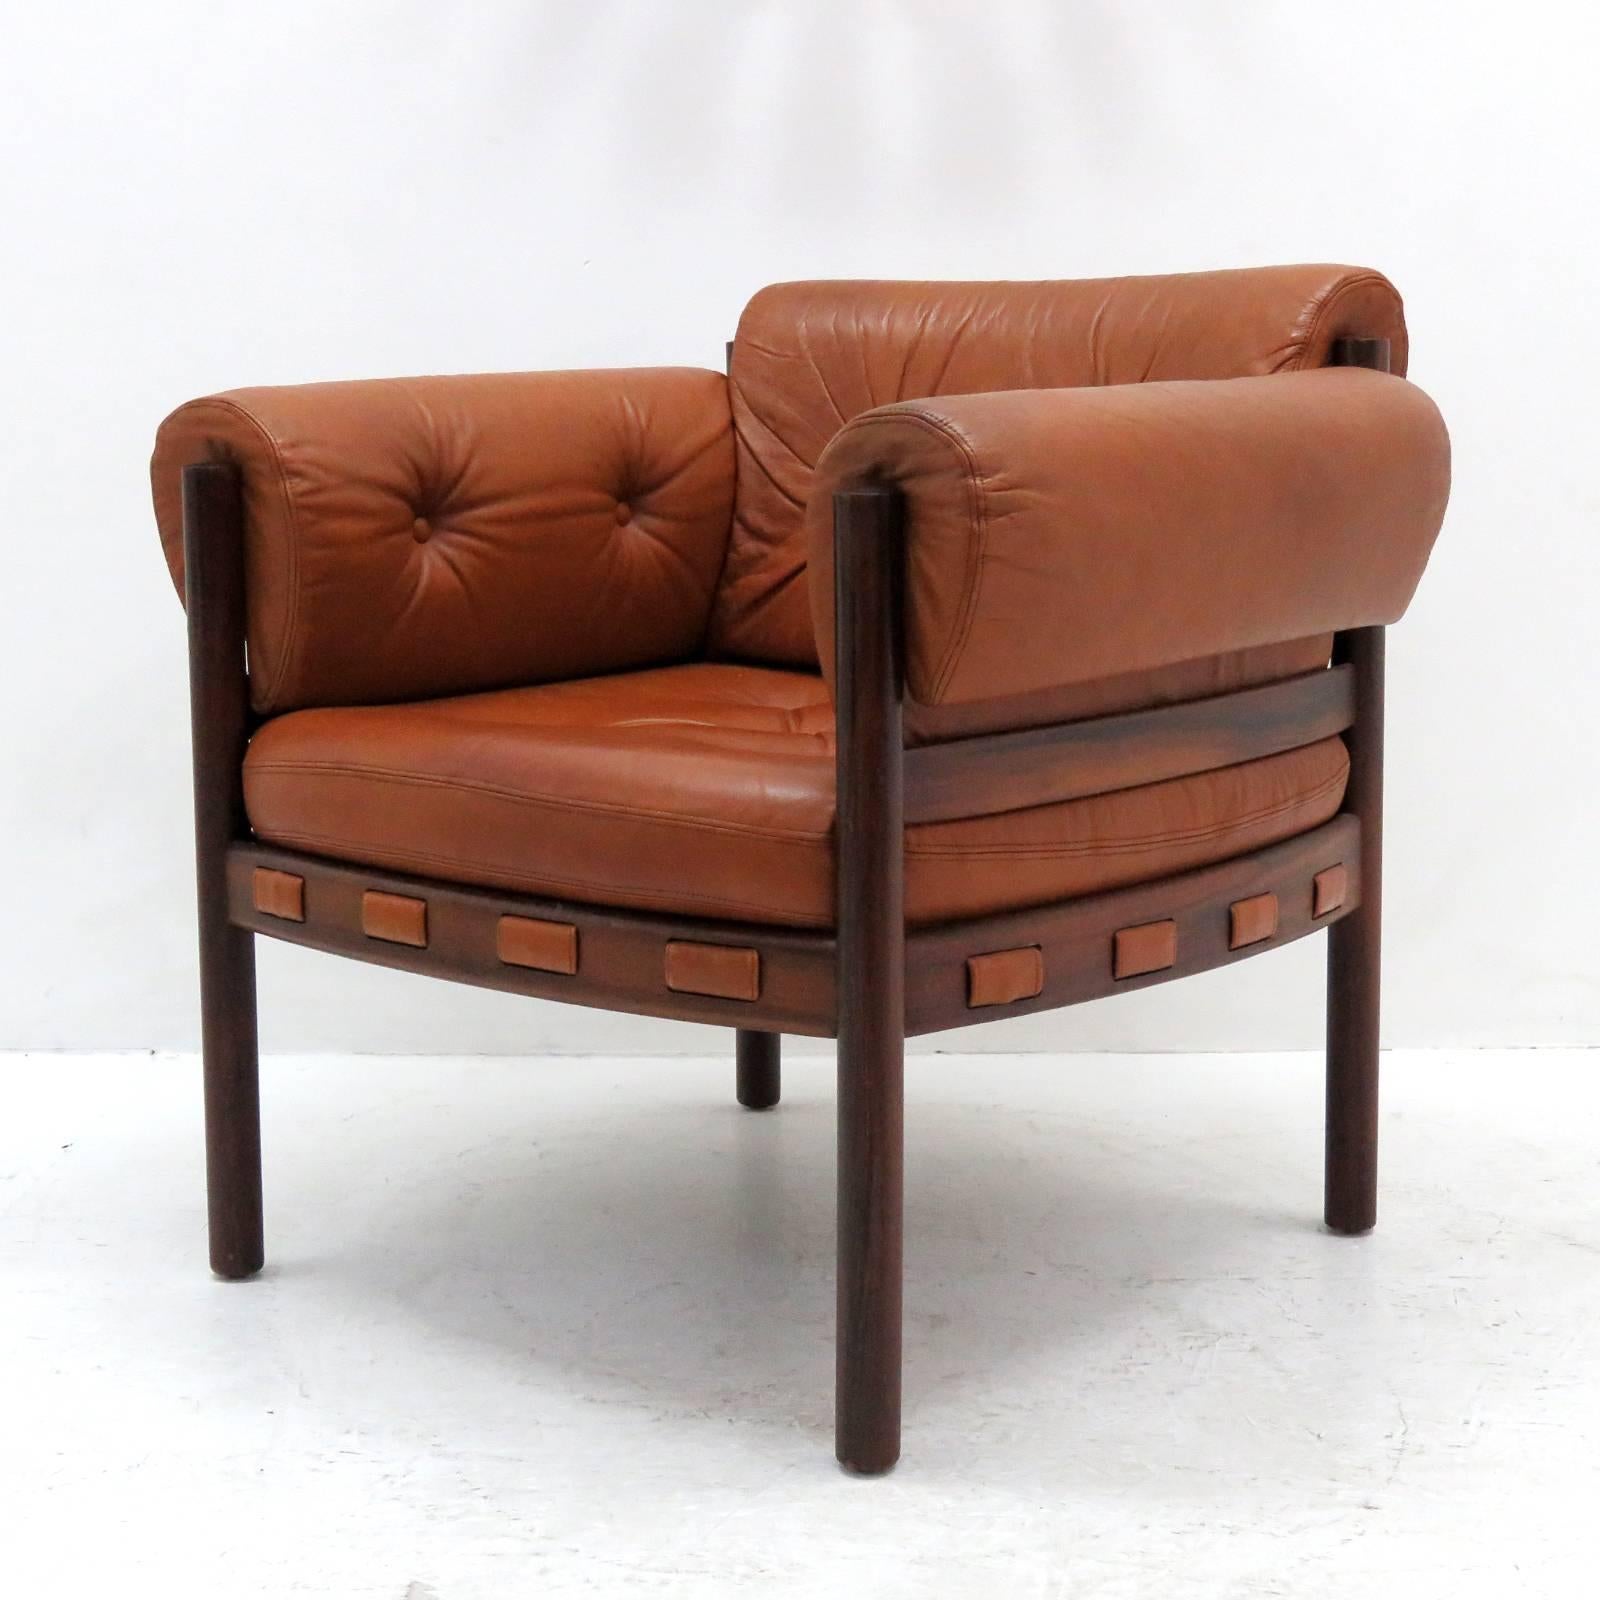 Swedish Arne Norell Rosewood Lounge Chairs for Coja Culemborg